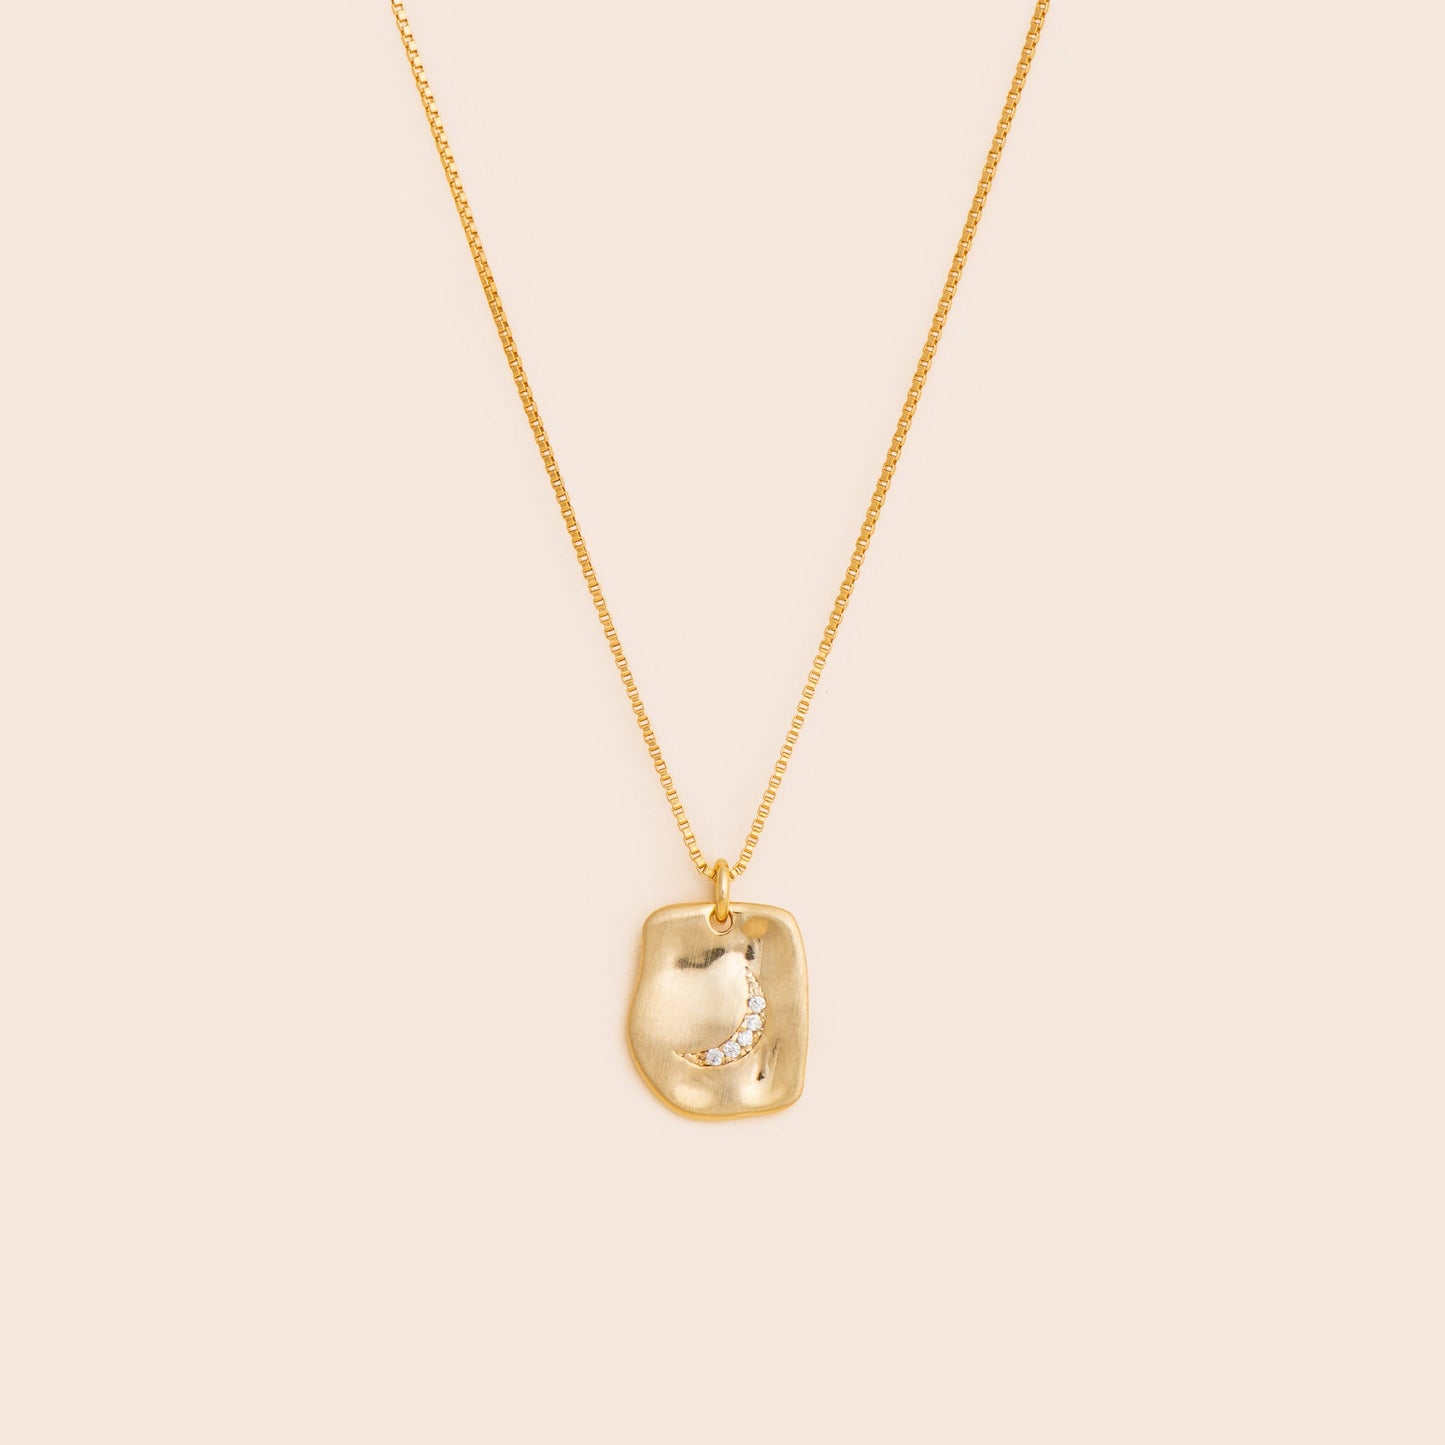 Moon Tag Necklace - Gold Filled - Gemlet